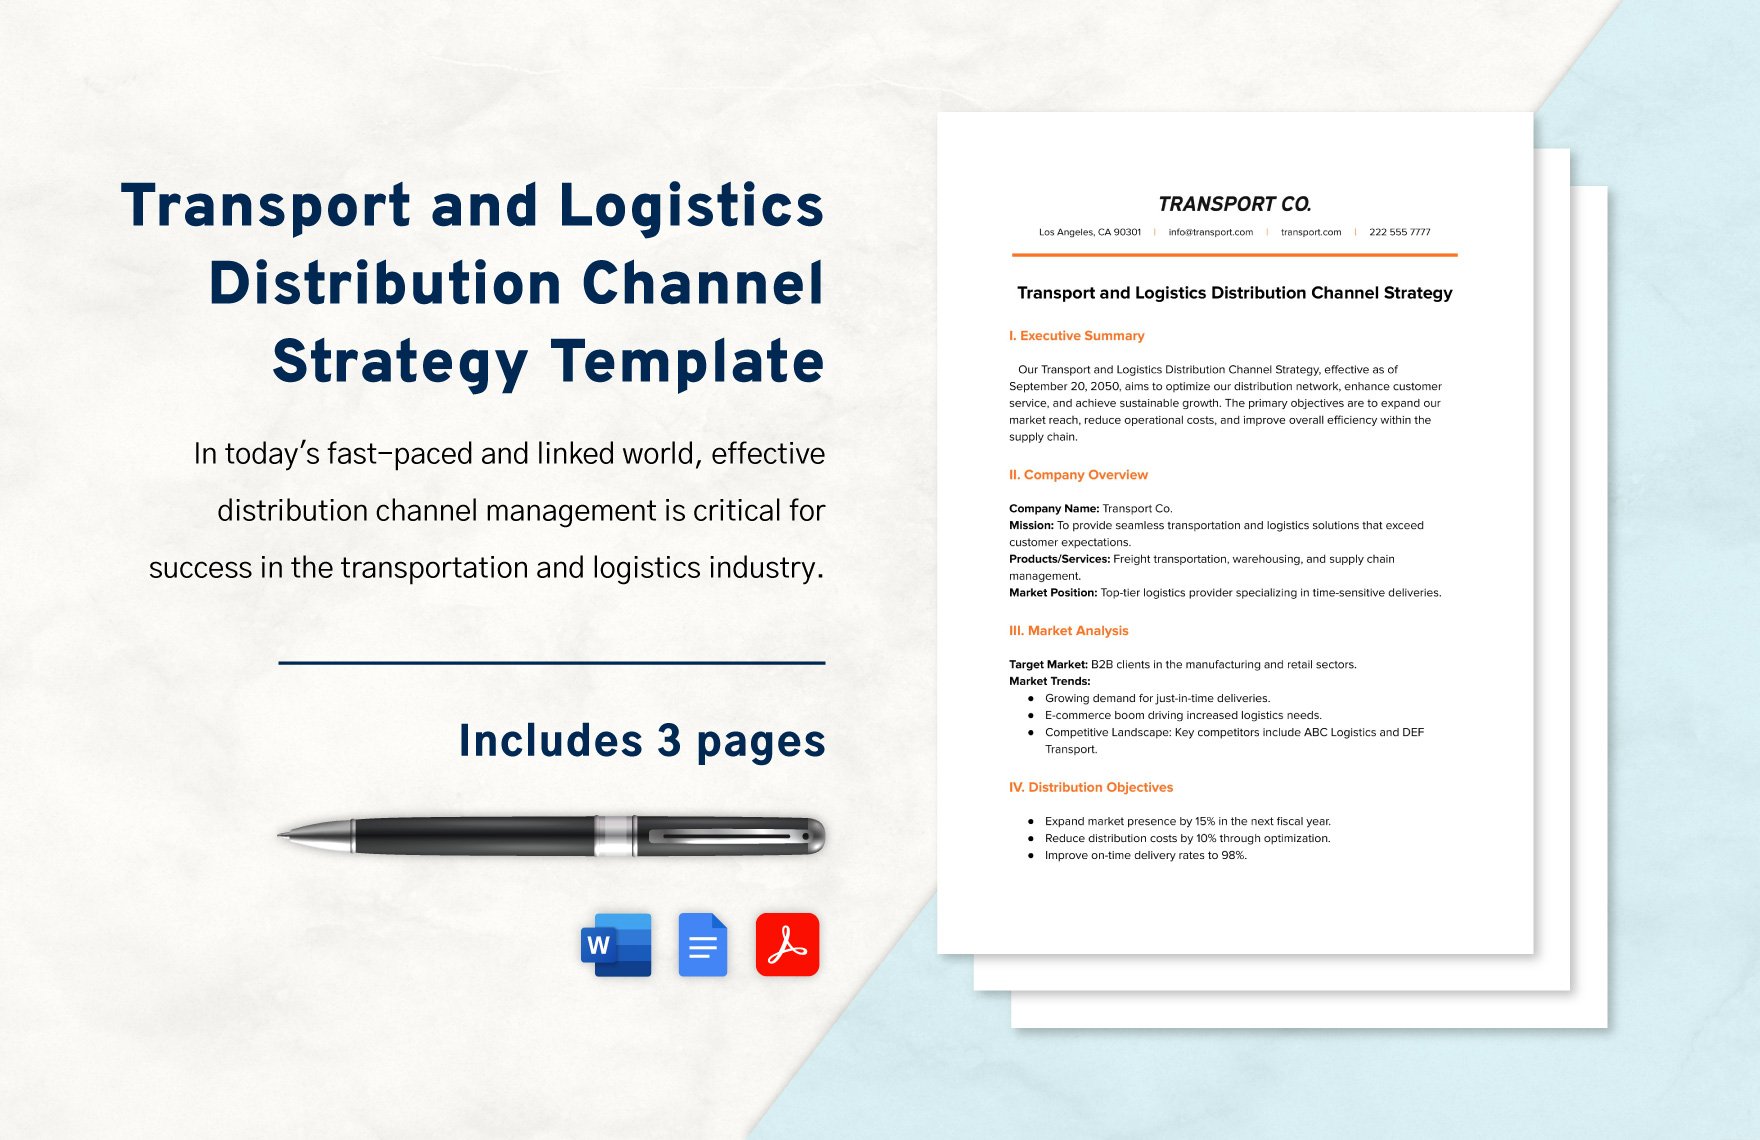 Transport and Logistics Distribution Channel Strategy Template